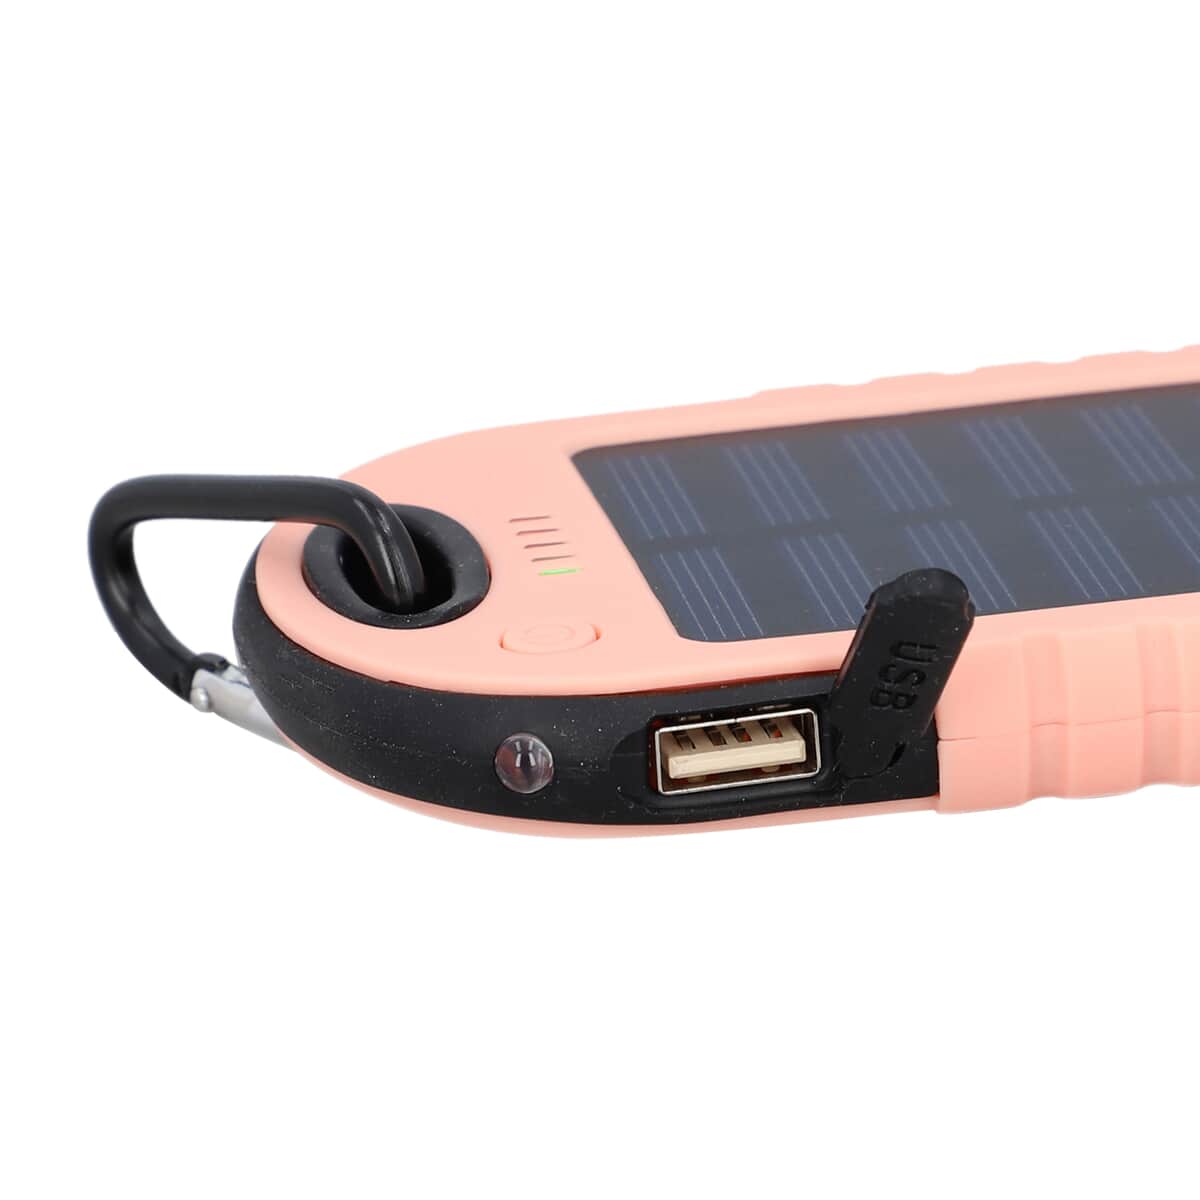 Homesmart Blush Carabiner Solar 5000 mAh Battery Charger with USB & Emergency LED Torch image number 5